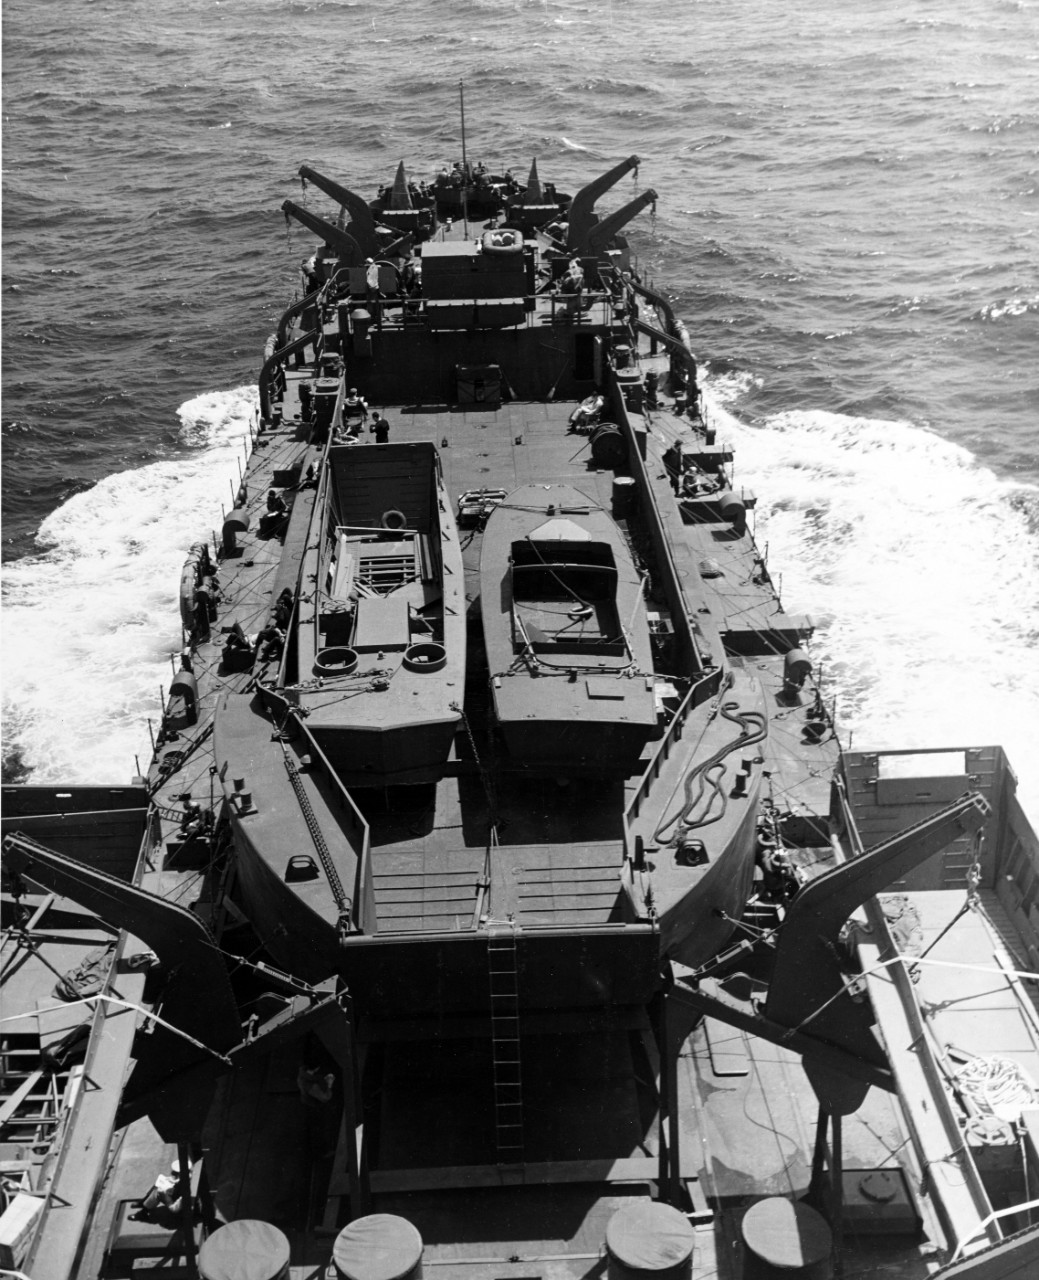 LST-350 en route to North Africa, in company with other LSTs, 15 April 1943. She is carrying as deck cargo an LCT, which is in turn carrying an LCPR and a small patrol boat.